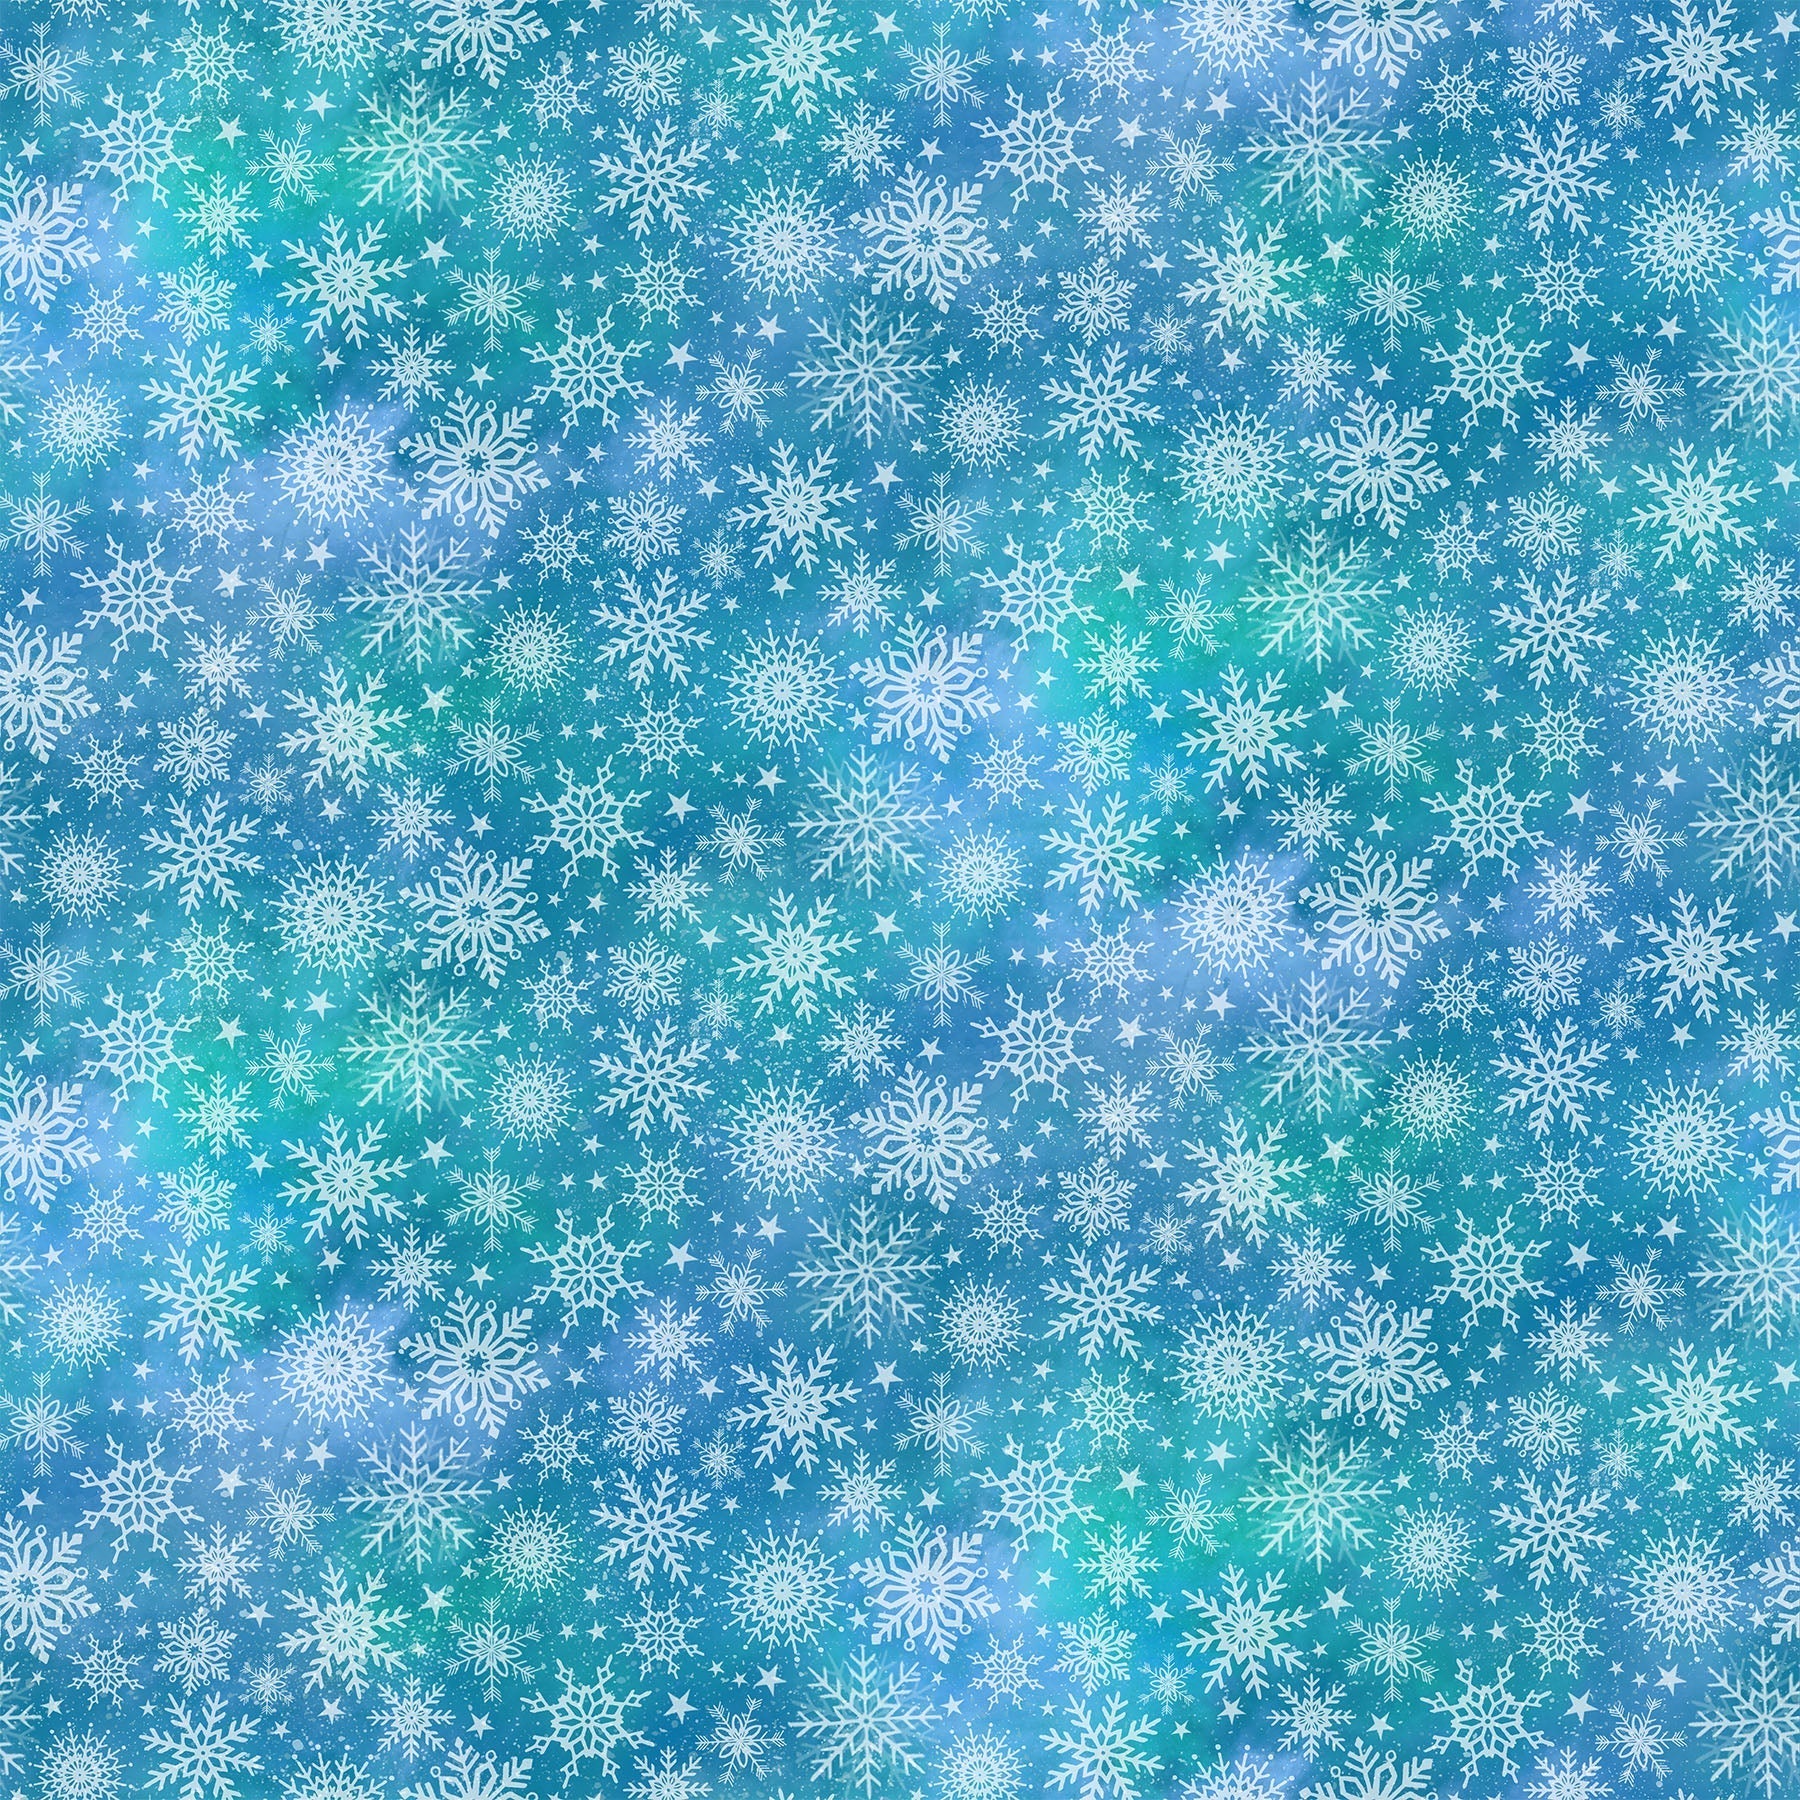 Northcott Fabric by the Yard Angels on High Teal Snowflakes (DP25358-66)